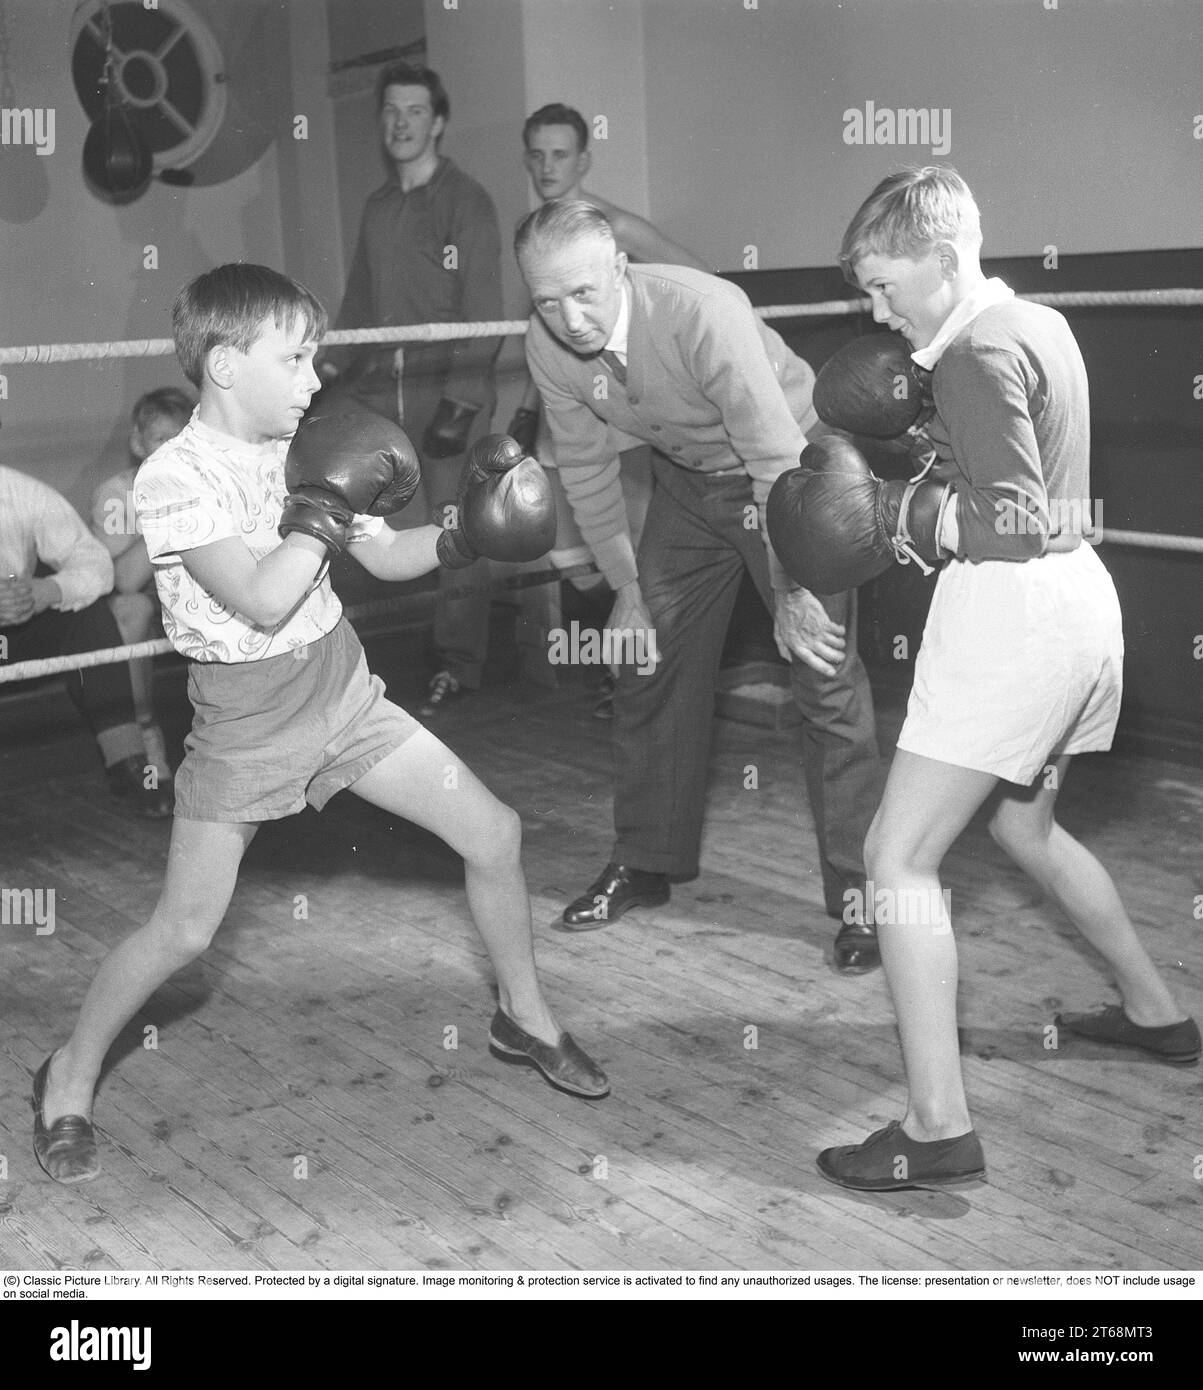 Boxing in the 1950s. Two young boxers facing each other in the ring, both wearing boxing gloves. A man acting as a referee is seen standing keeping an eye on them. Sweden 1954 Kristoffersson ref BO16-12 Stock Photo